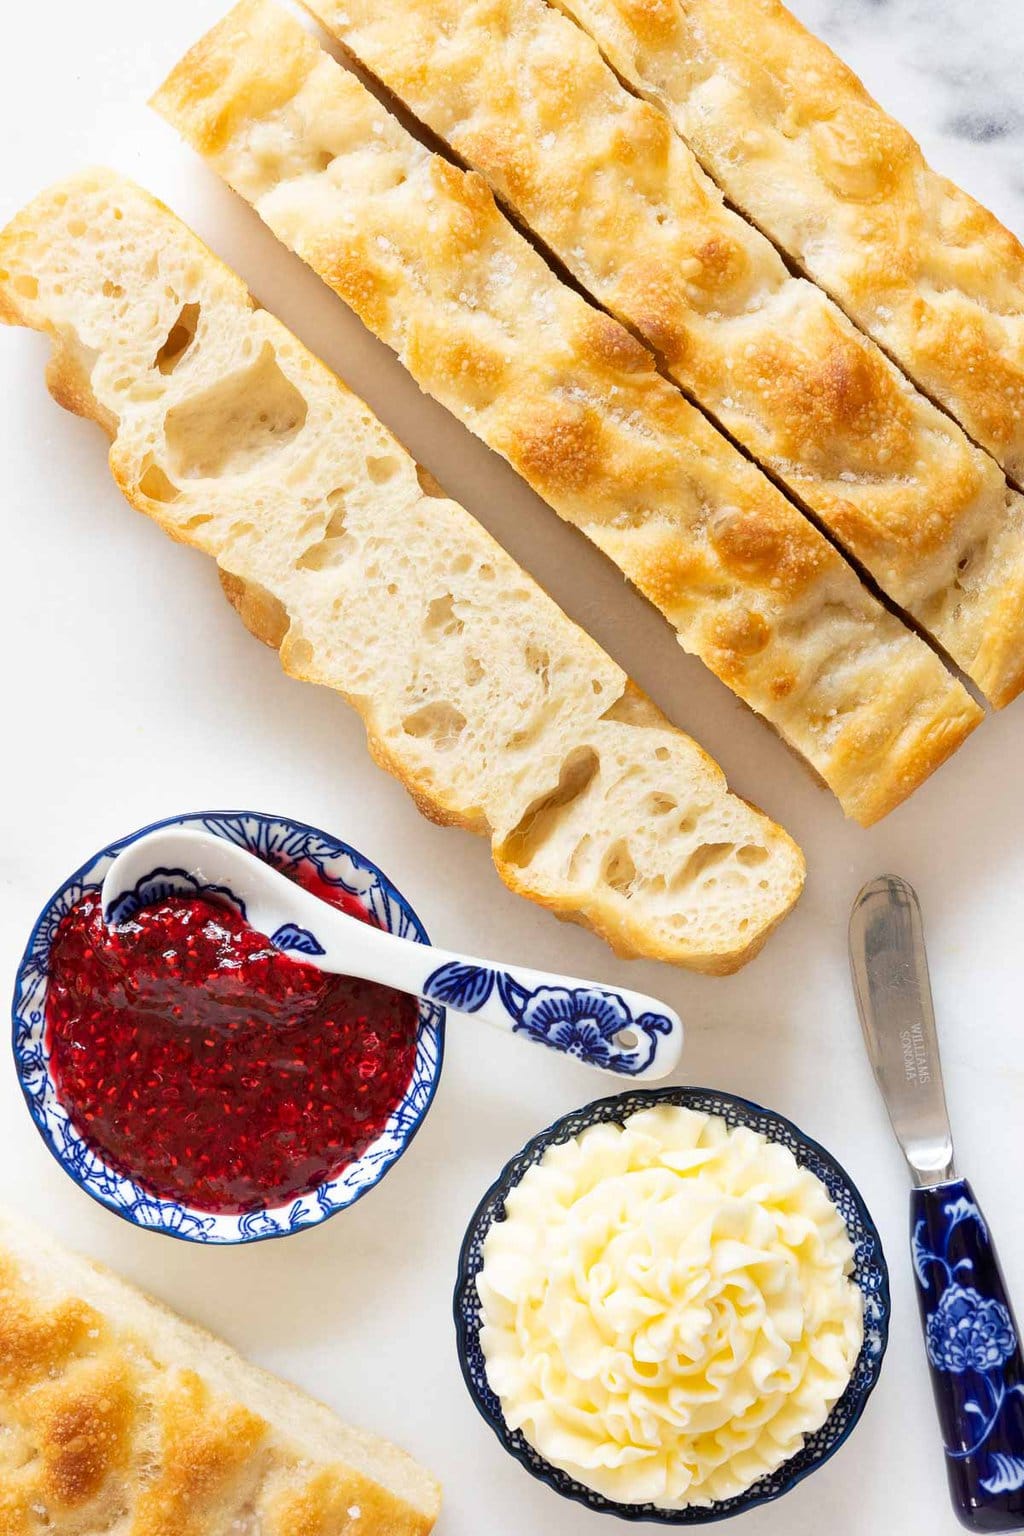 Vertical overhead photo of slices of Ridiculously Easy Same Day Focaccia bread and bowls of Raspberry jam and piped butter.